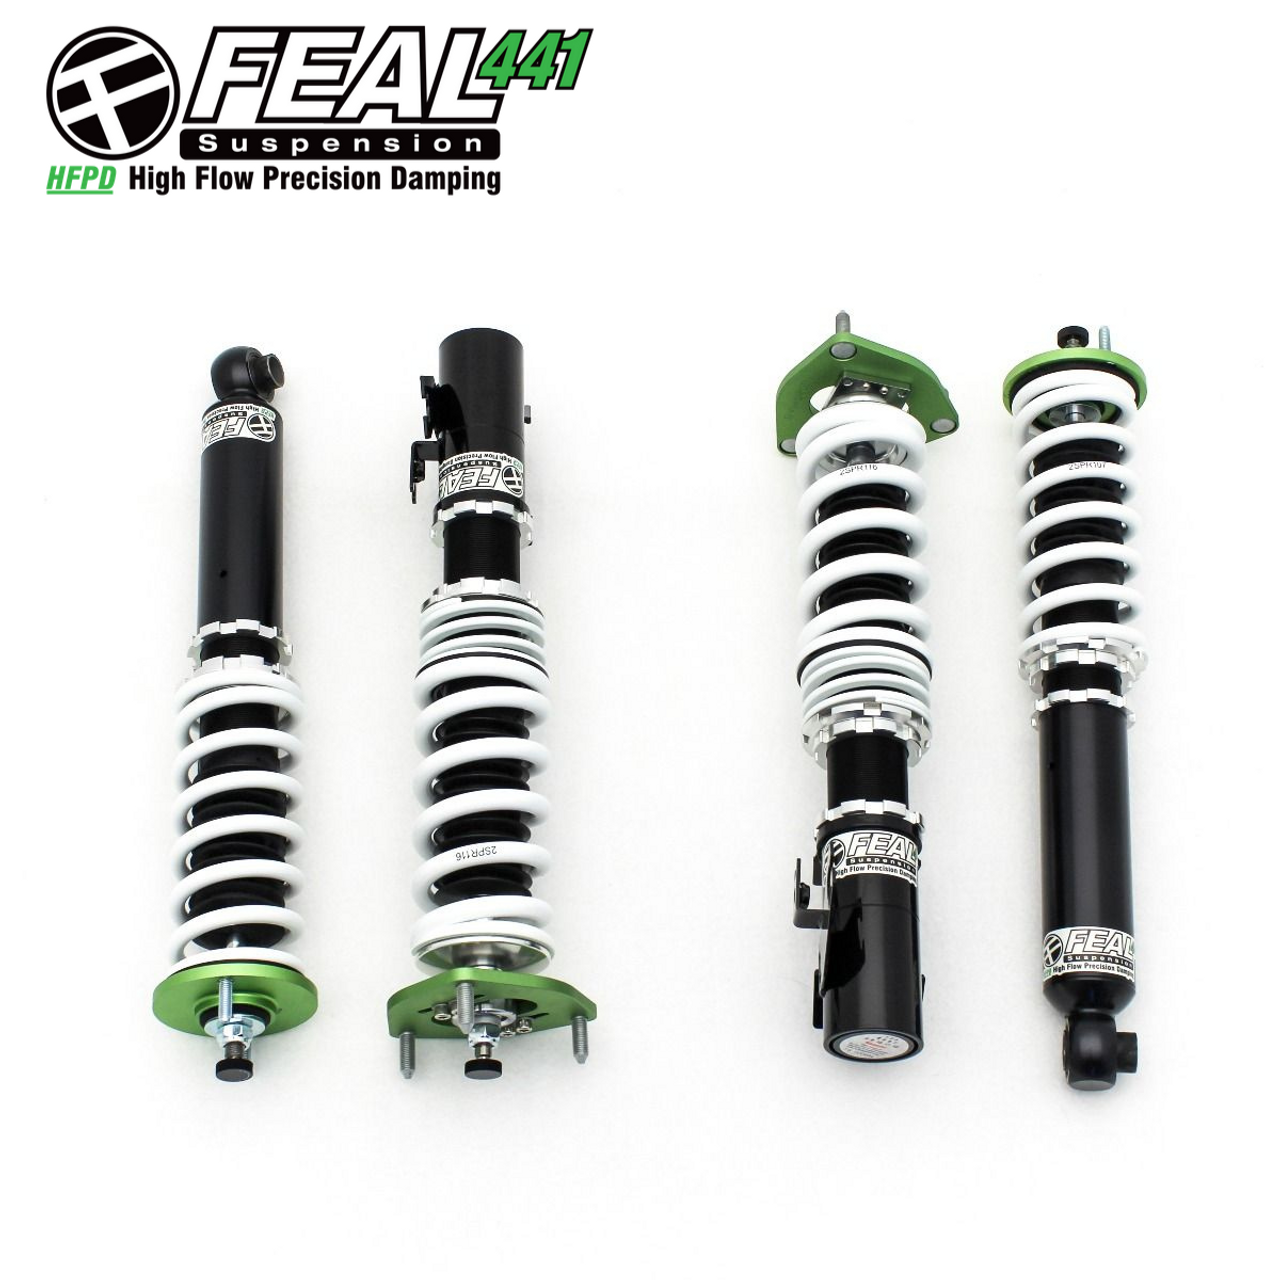 Feal Suspension 441 Coilover Kit - Nissan S13